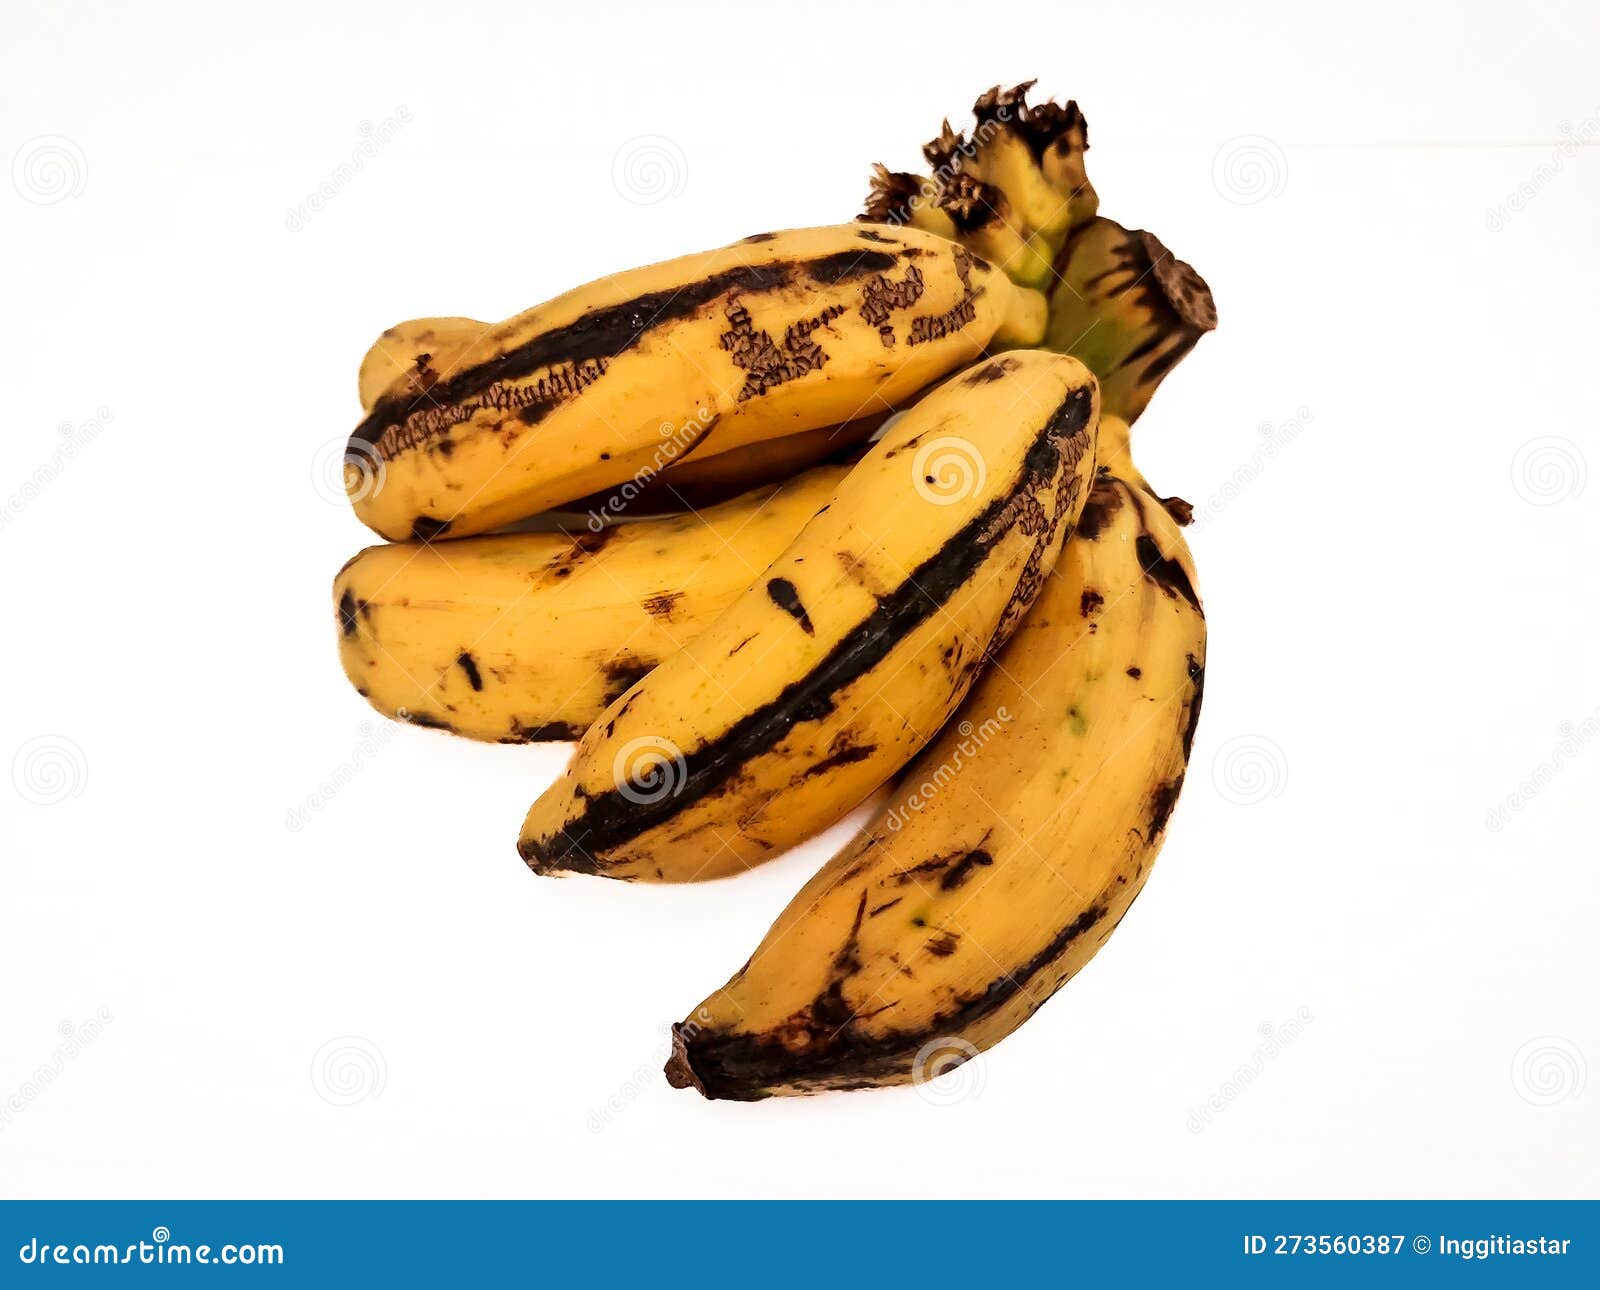 Overripe Bananas with Black Color on Yellow Skin in a White Background ...